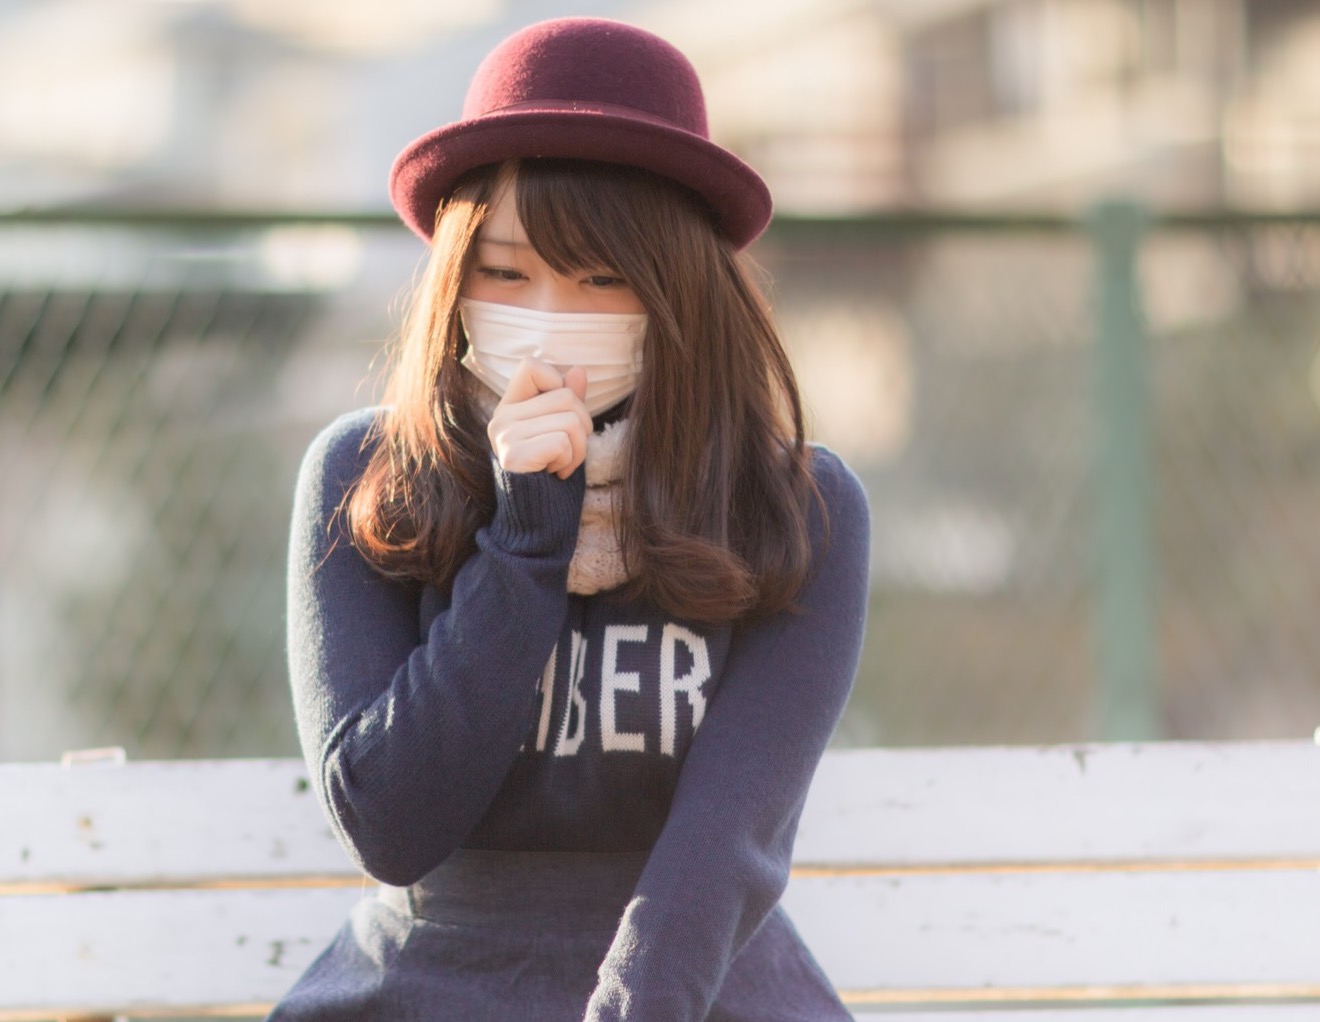 Japanese Model Cuts Up Her Bra And Turns It Into A Face Mask Soranews24 Japan News